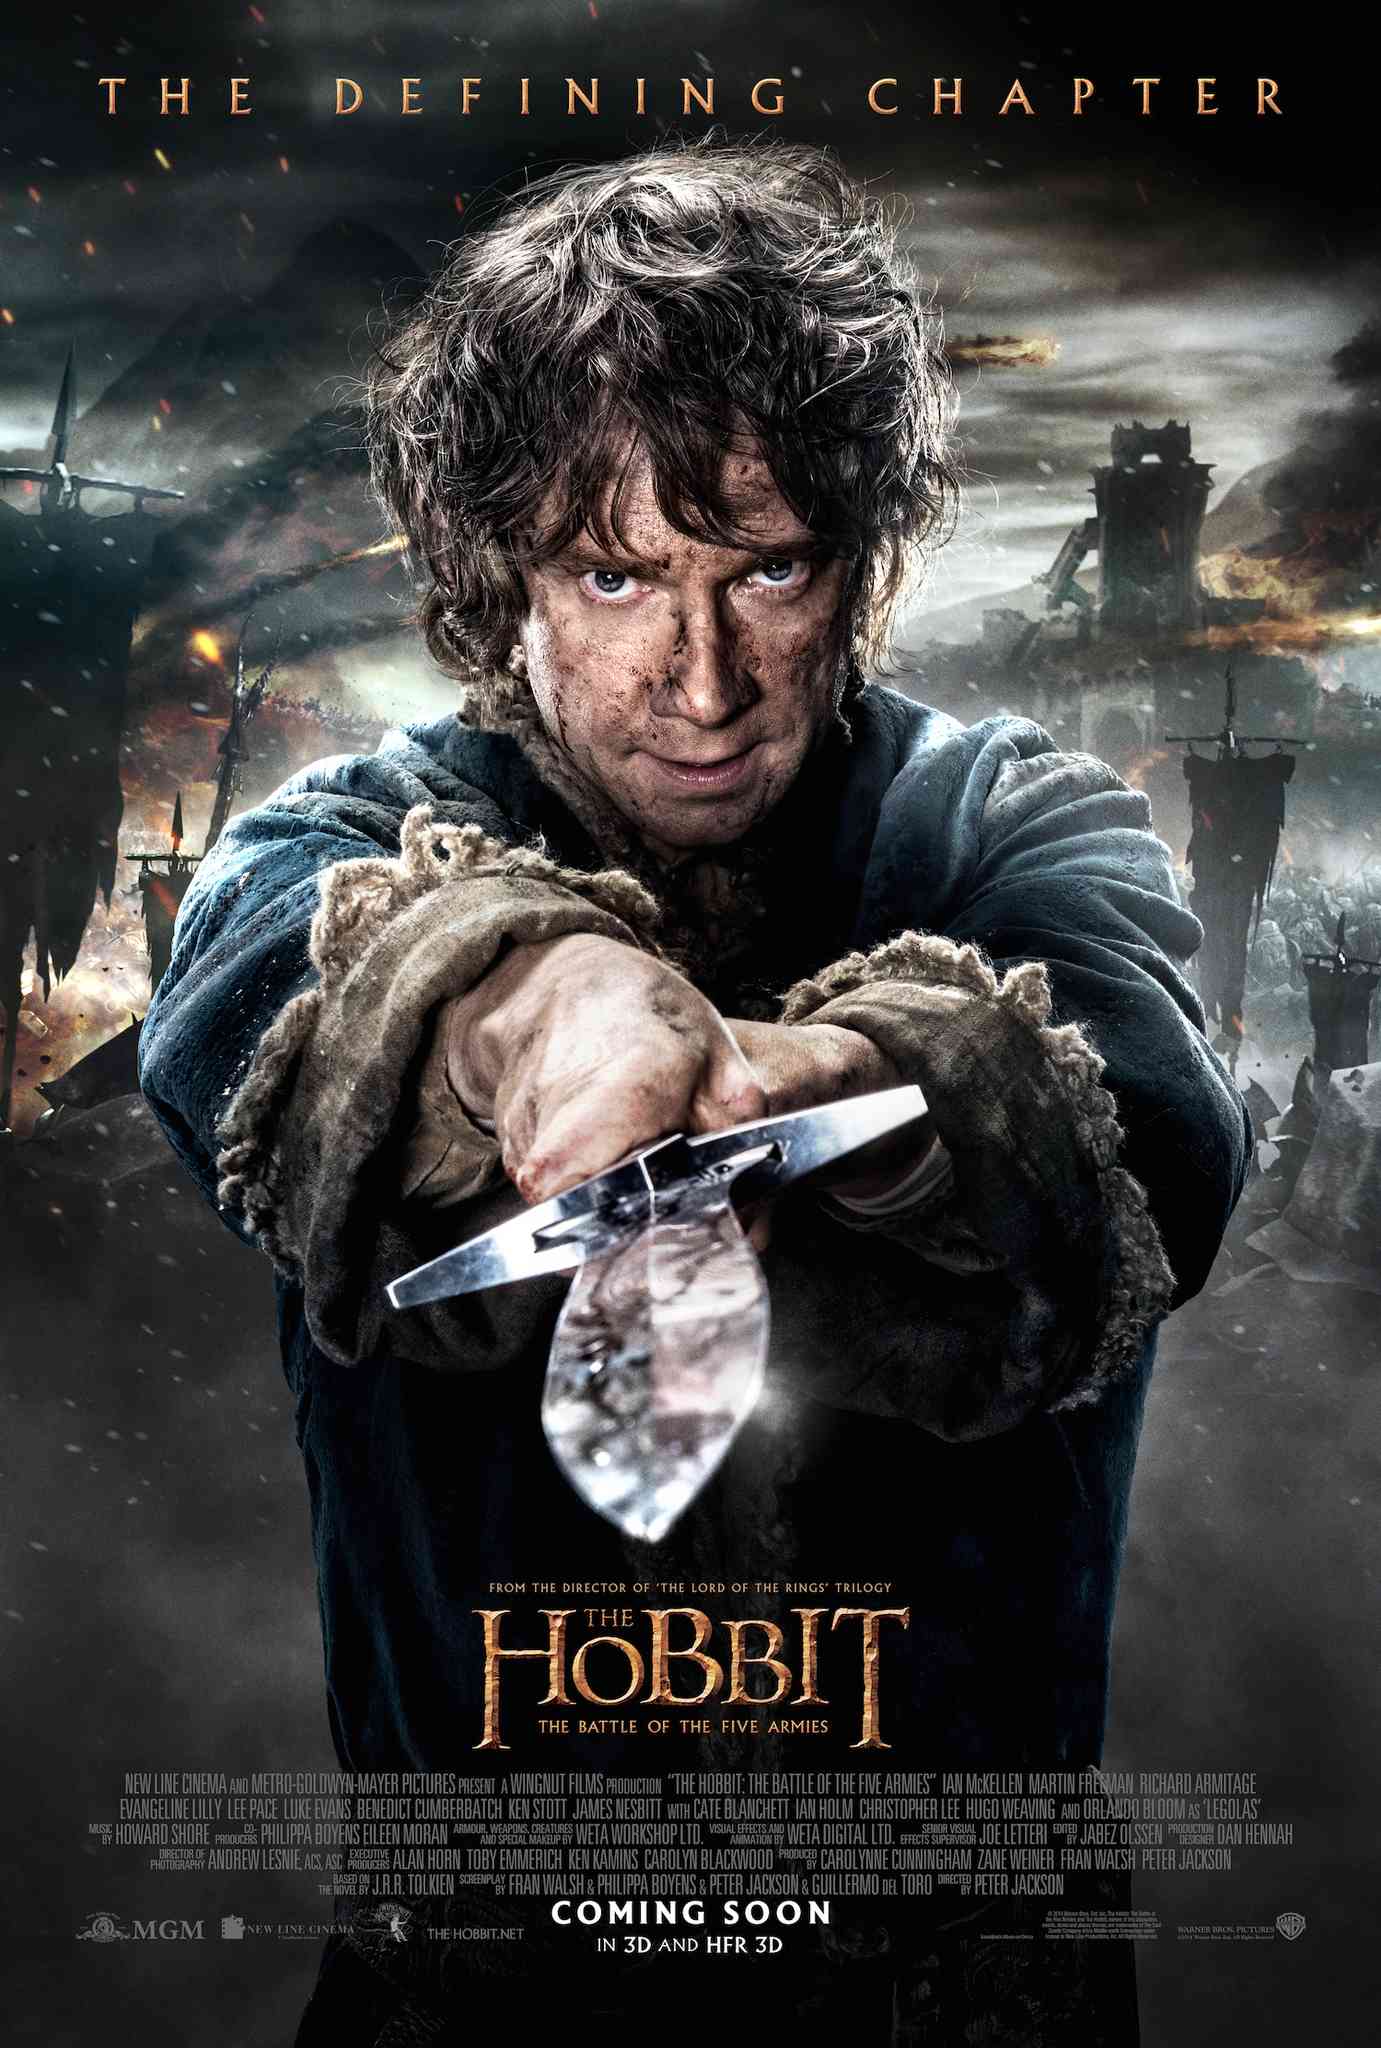 FULL MOVIE: The Hobbit 3: The Battle of the Five Armies (2014)